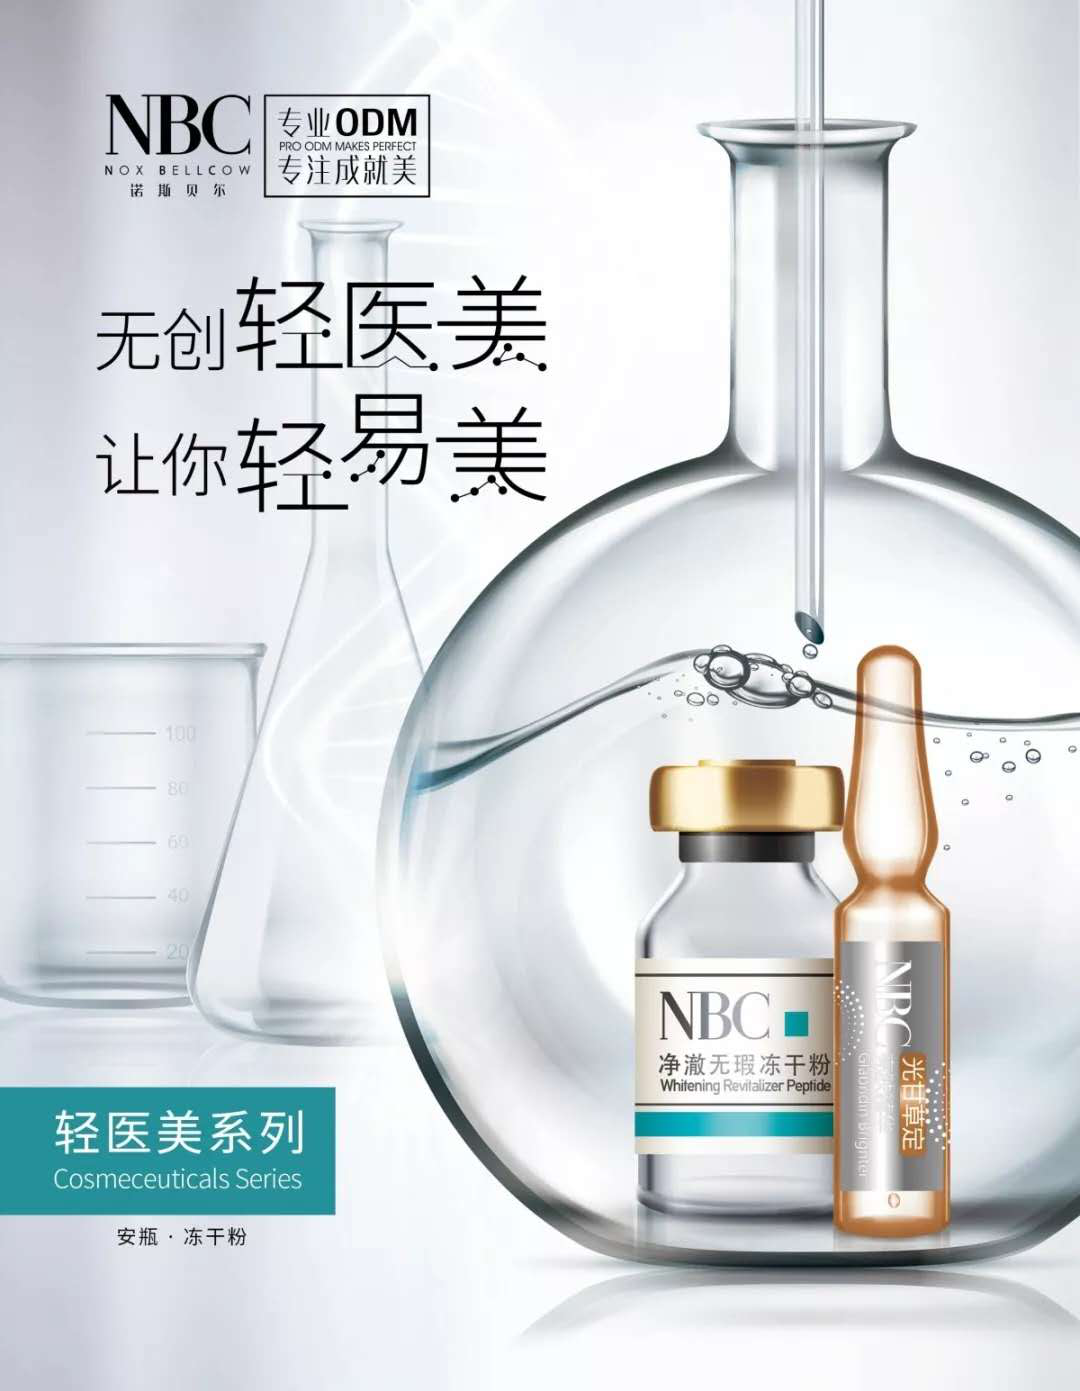 NOX BELLCOW-Determined To Promote New China-made Beauty Products, Nbc Is Helping Clients-3